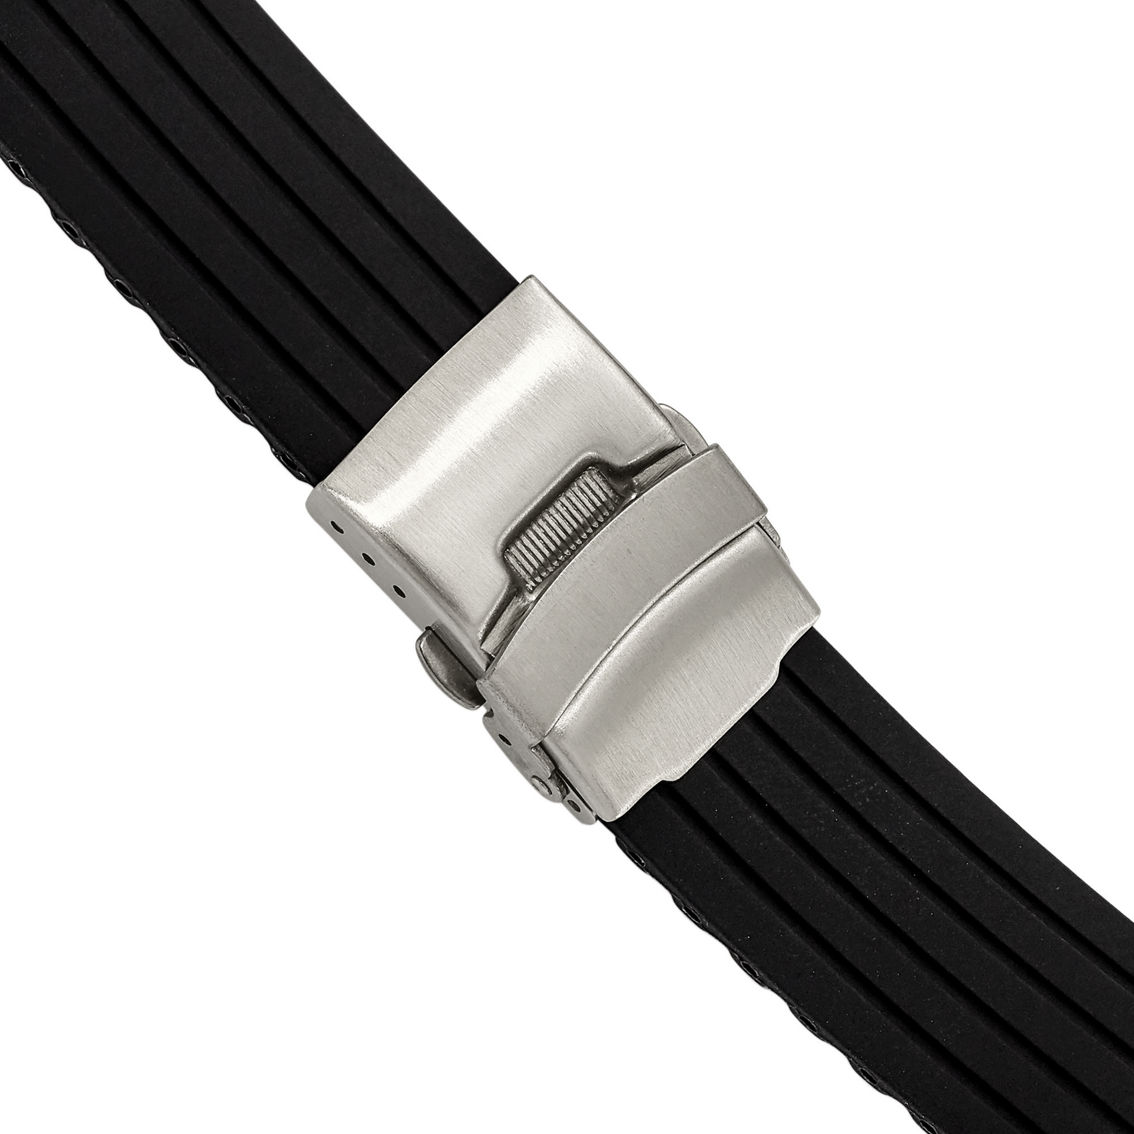 Debeer 20mm Black Stripe Silicone Stainless STL Deployment Buckle Watch Band - Image 2 of 2